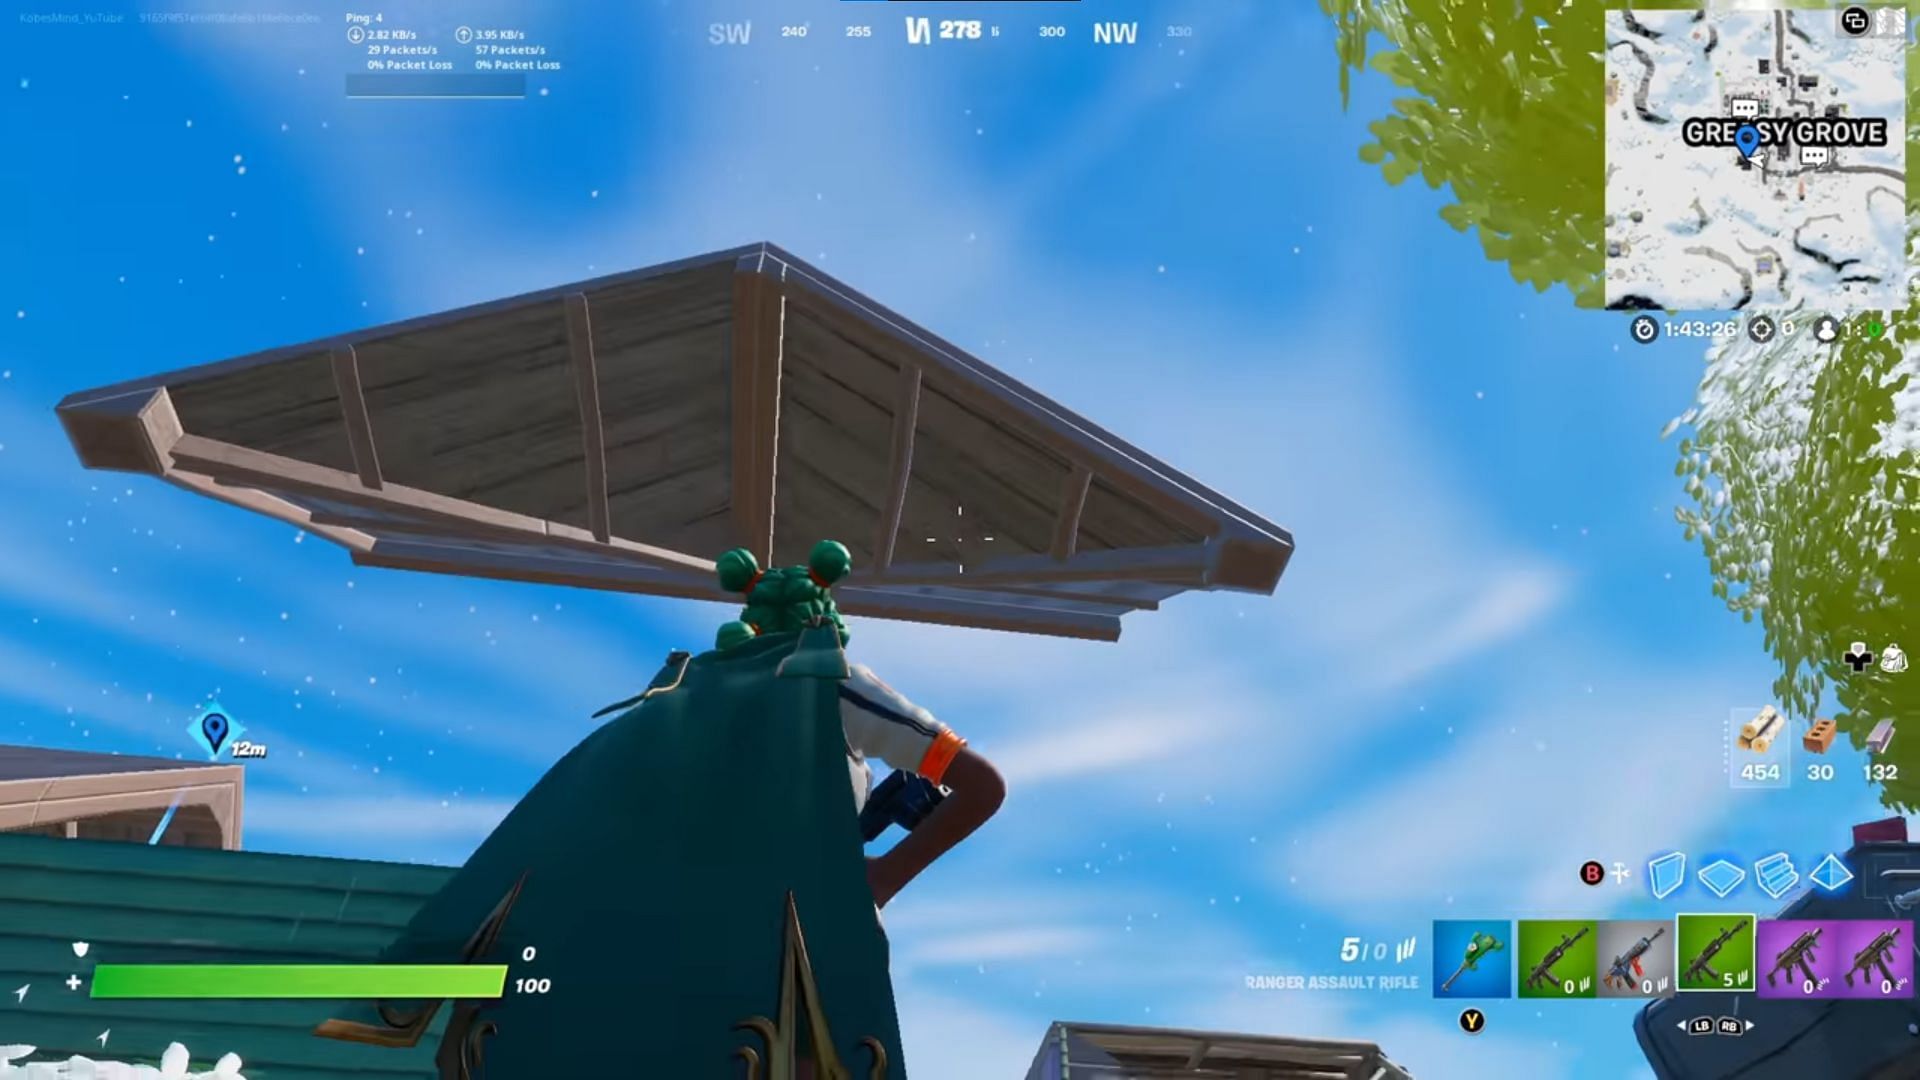 The floating roof in Greasy Grove (Image via Kobes Shorts and Epic Games)